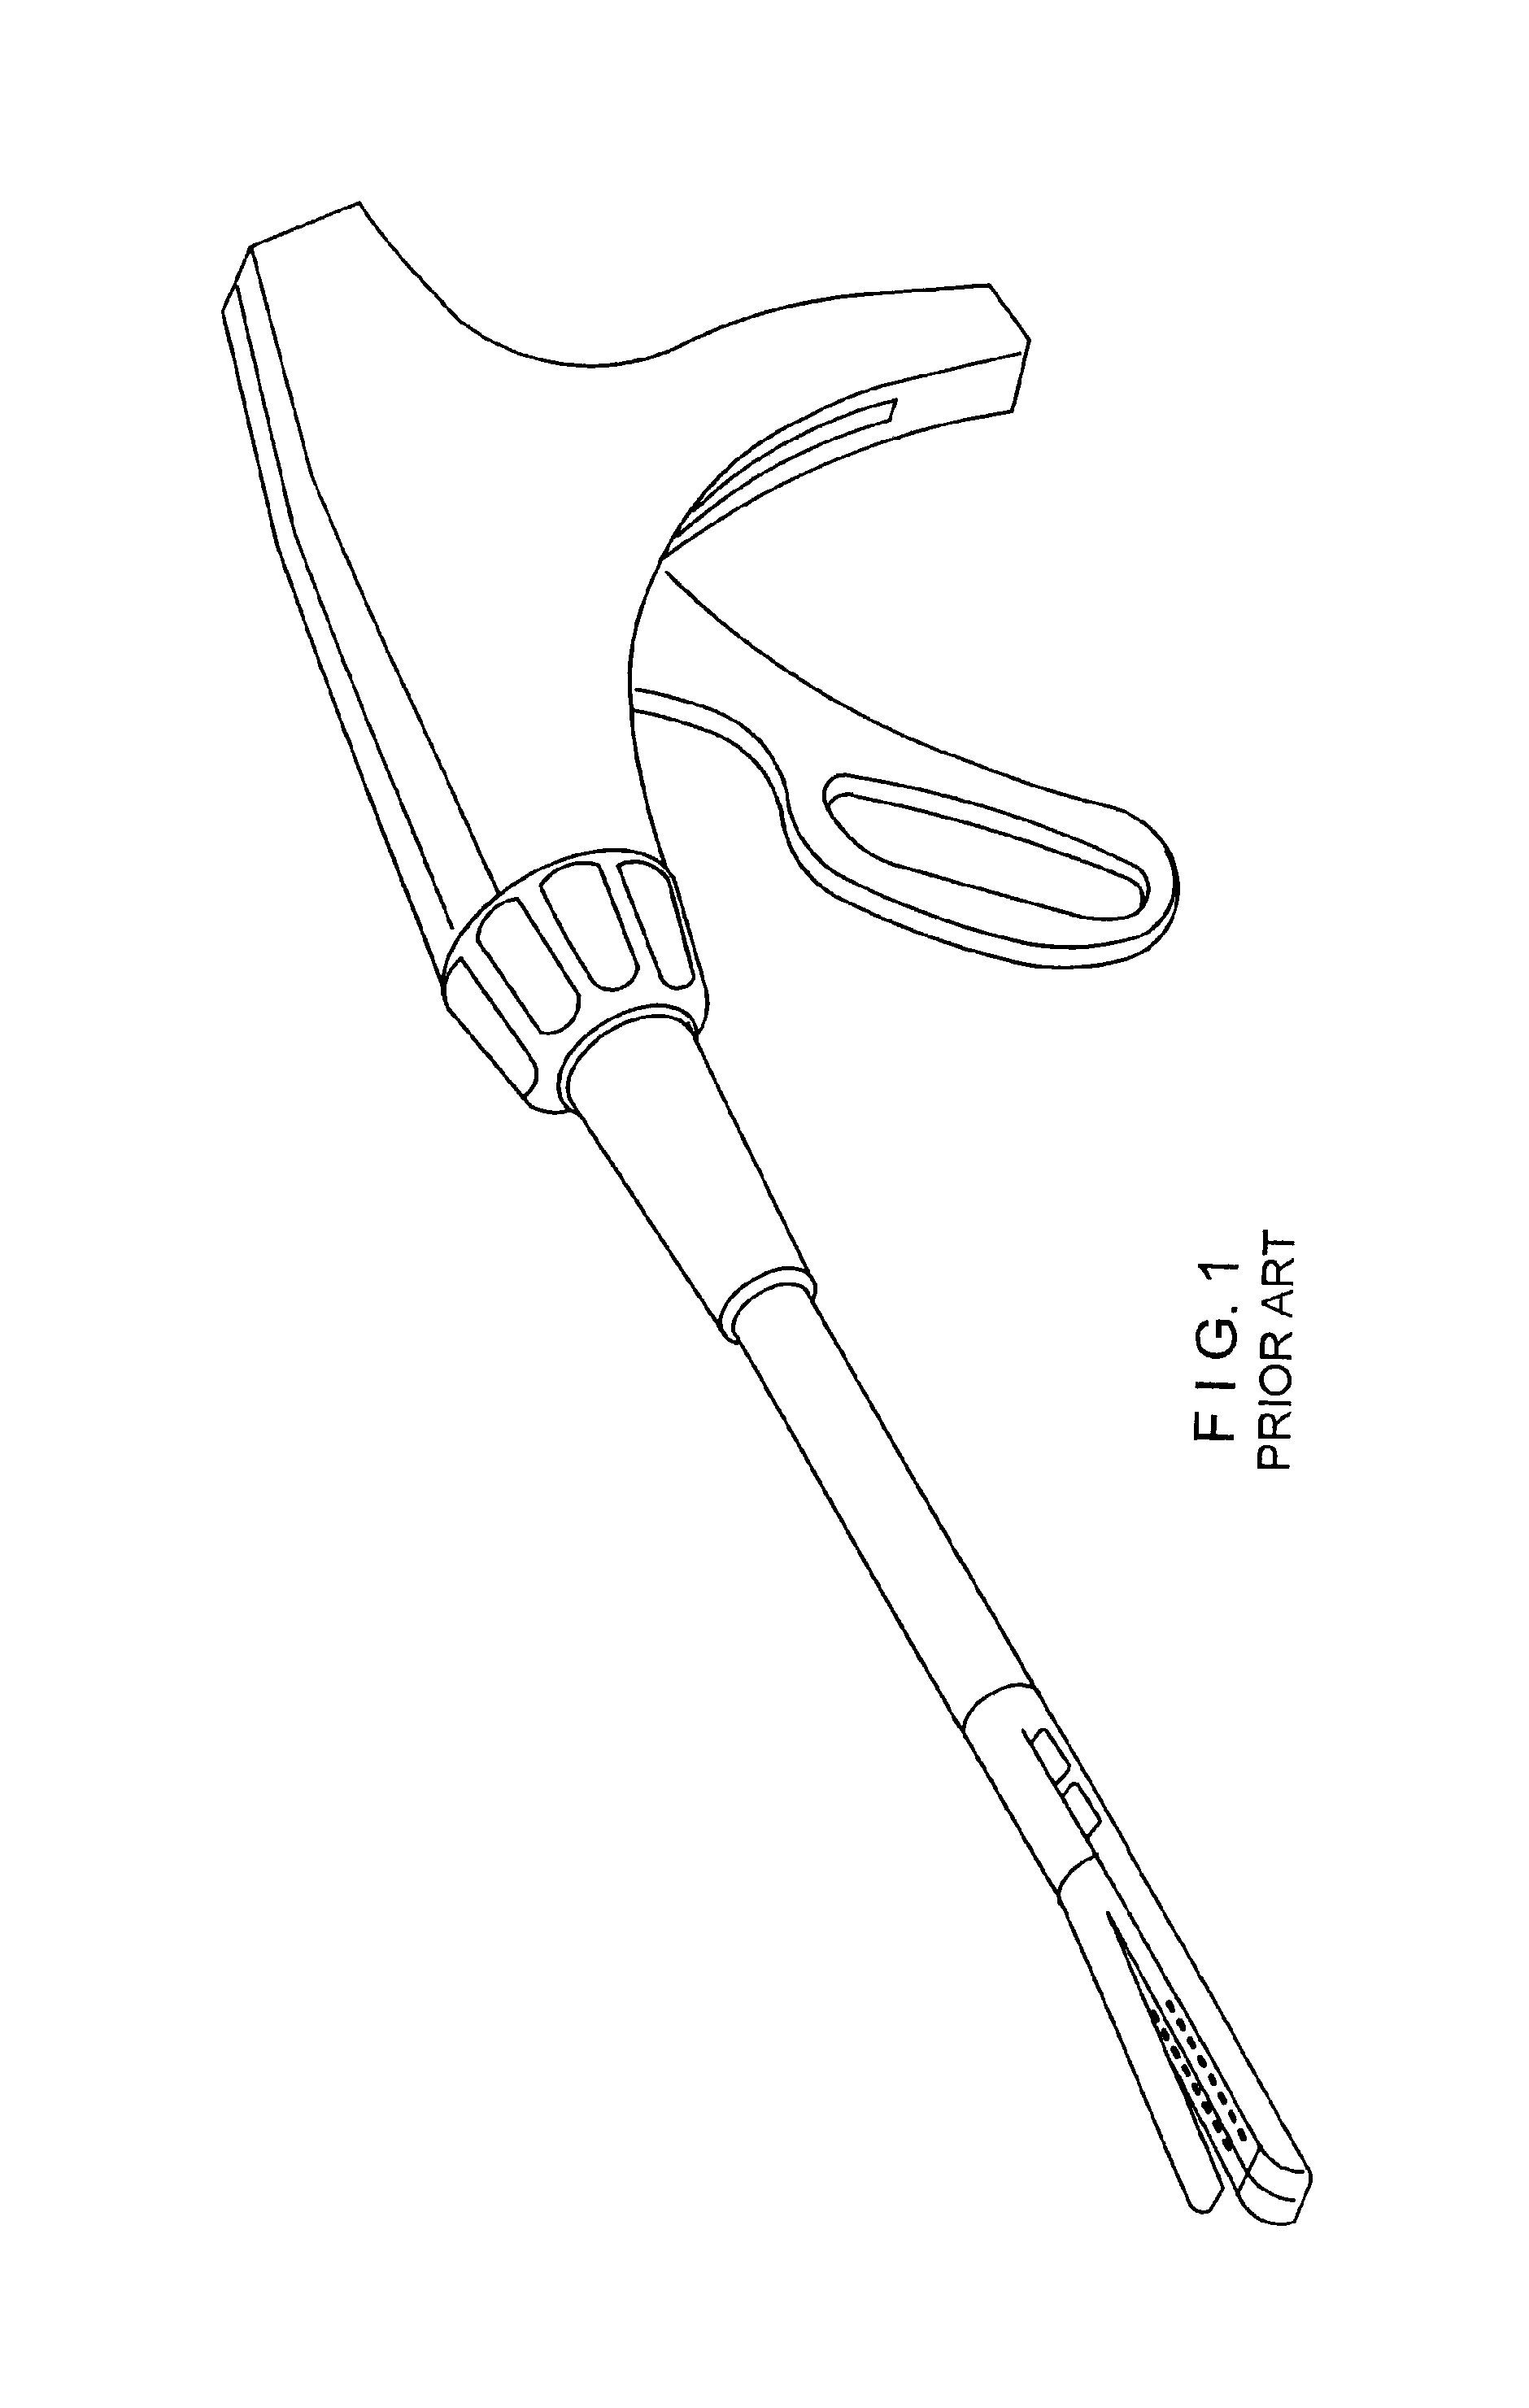 Imaging system for a surgical device